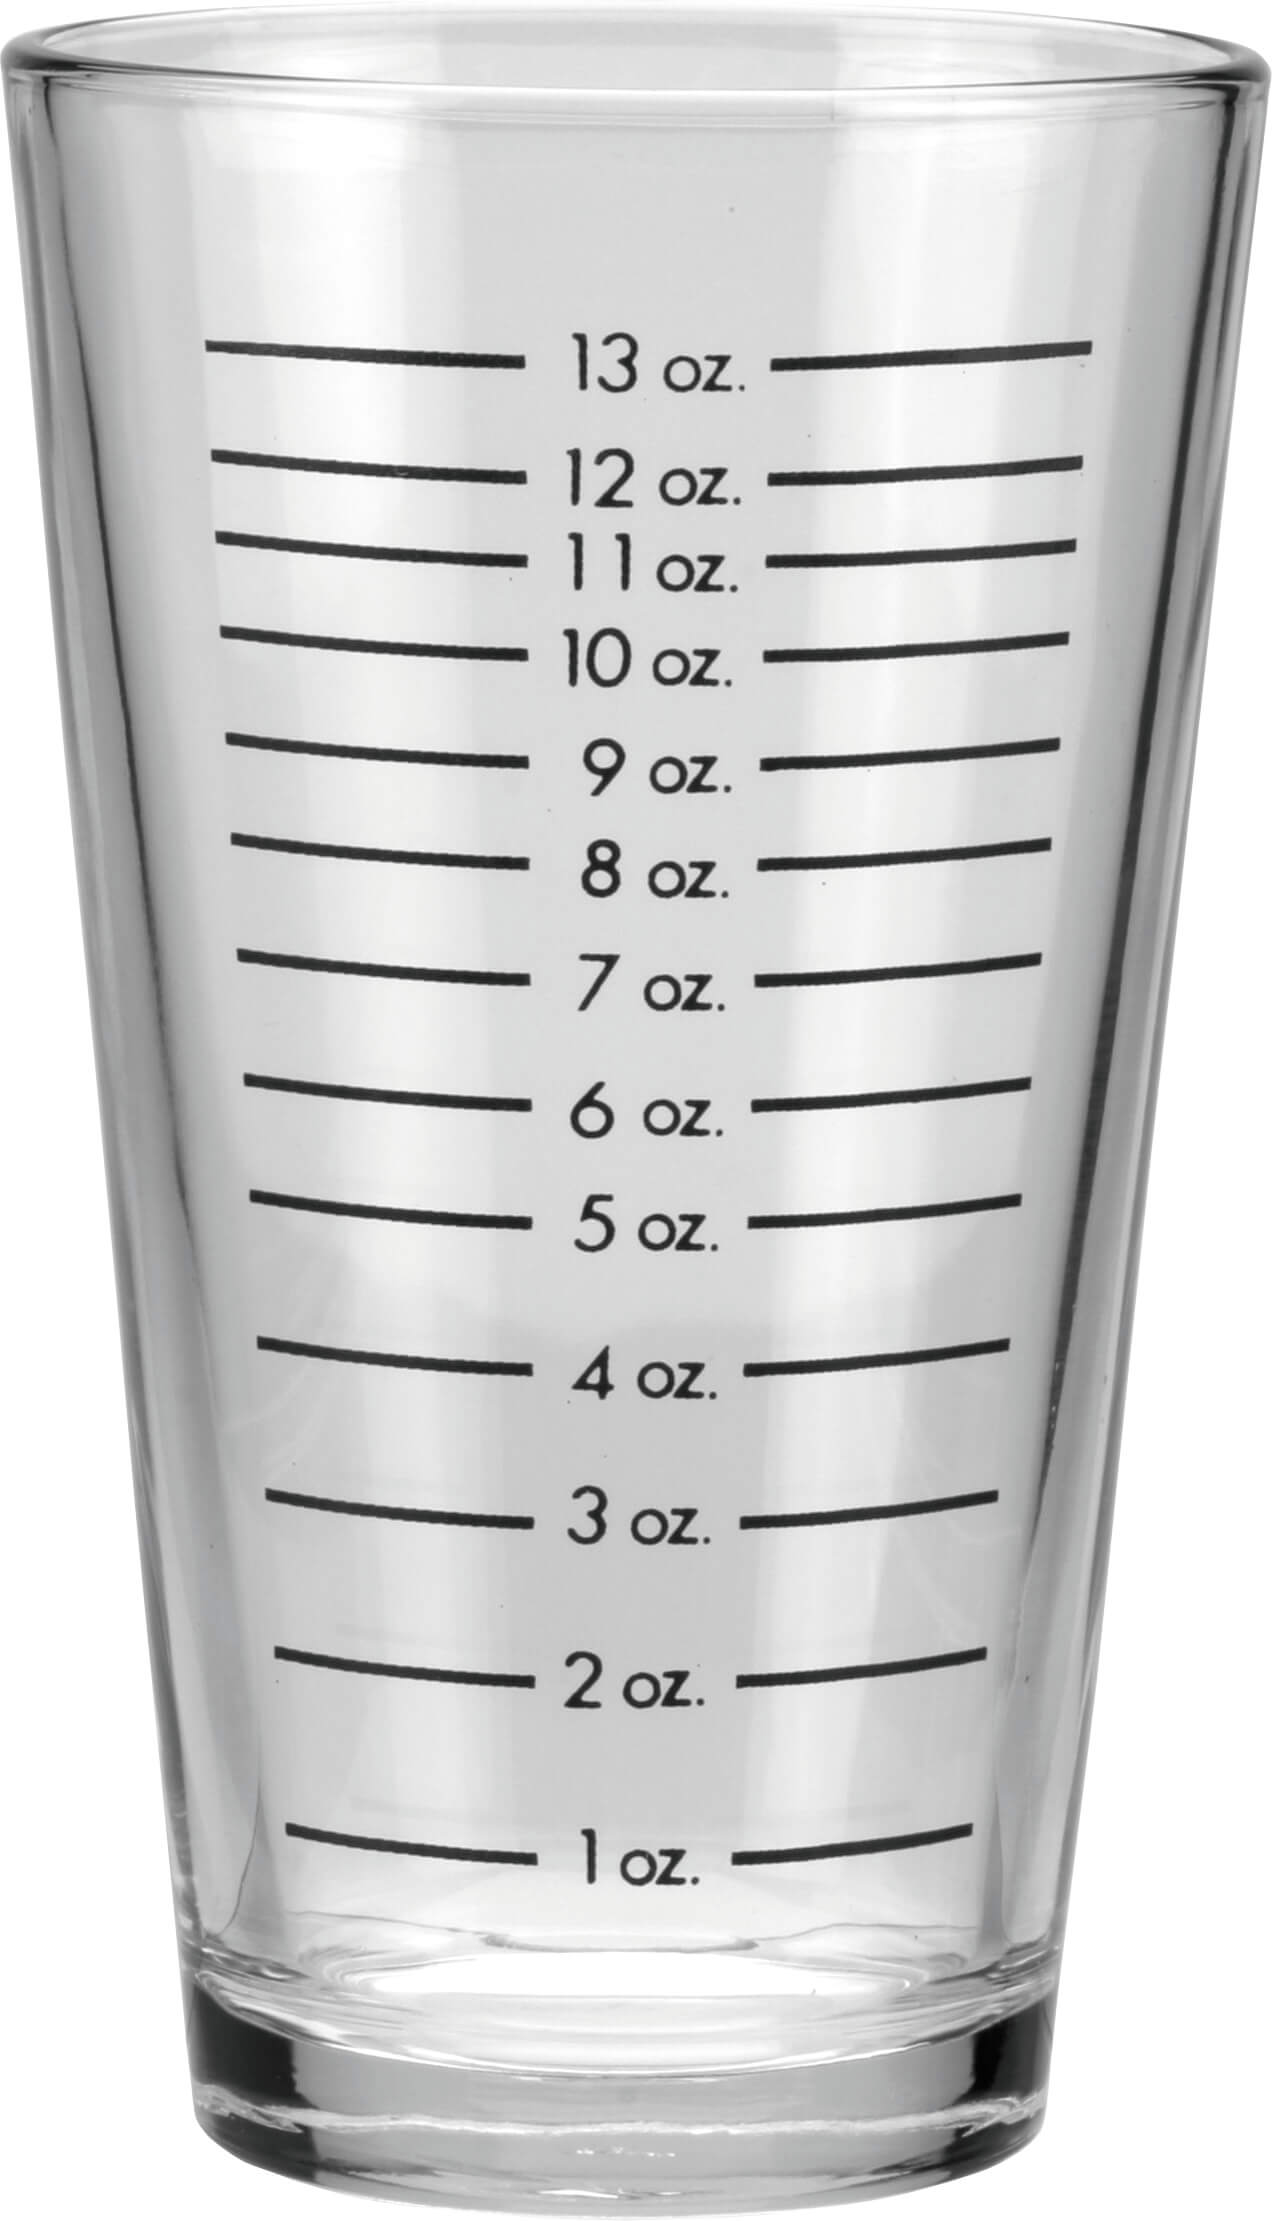 Mixing glass, Libbey - ounces scale (474ml)